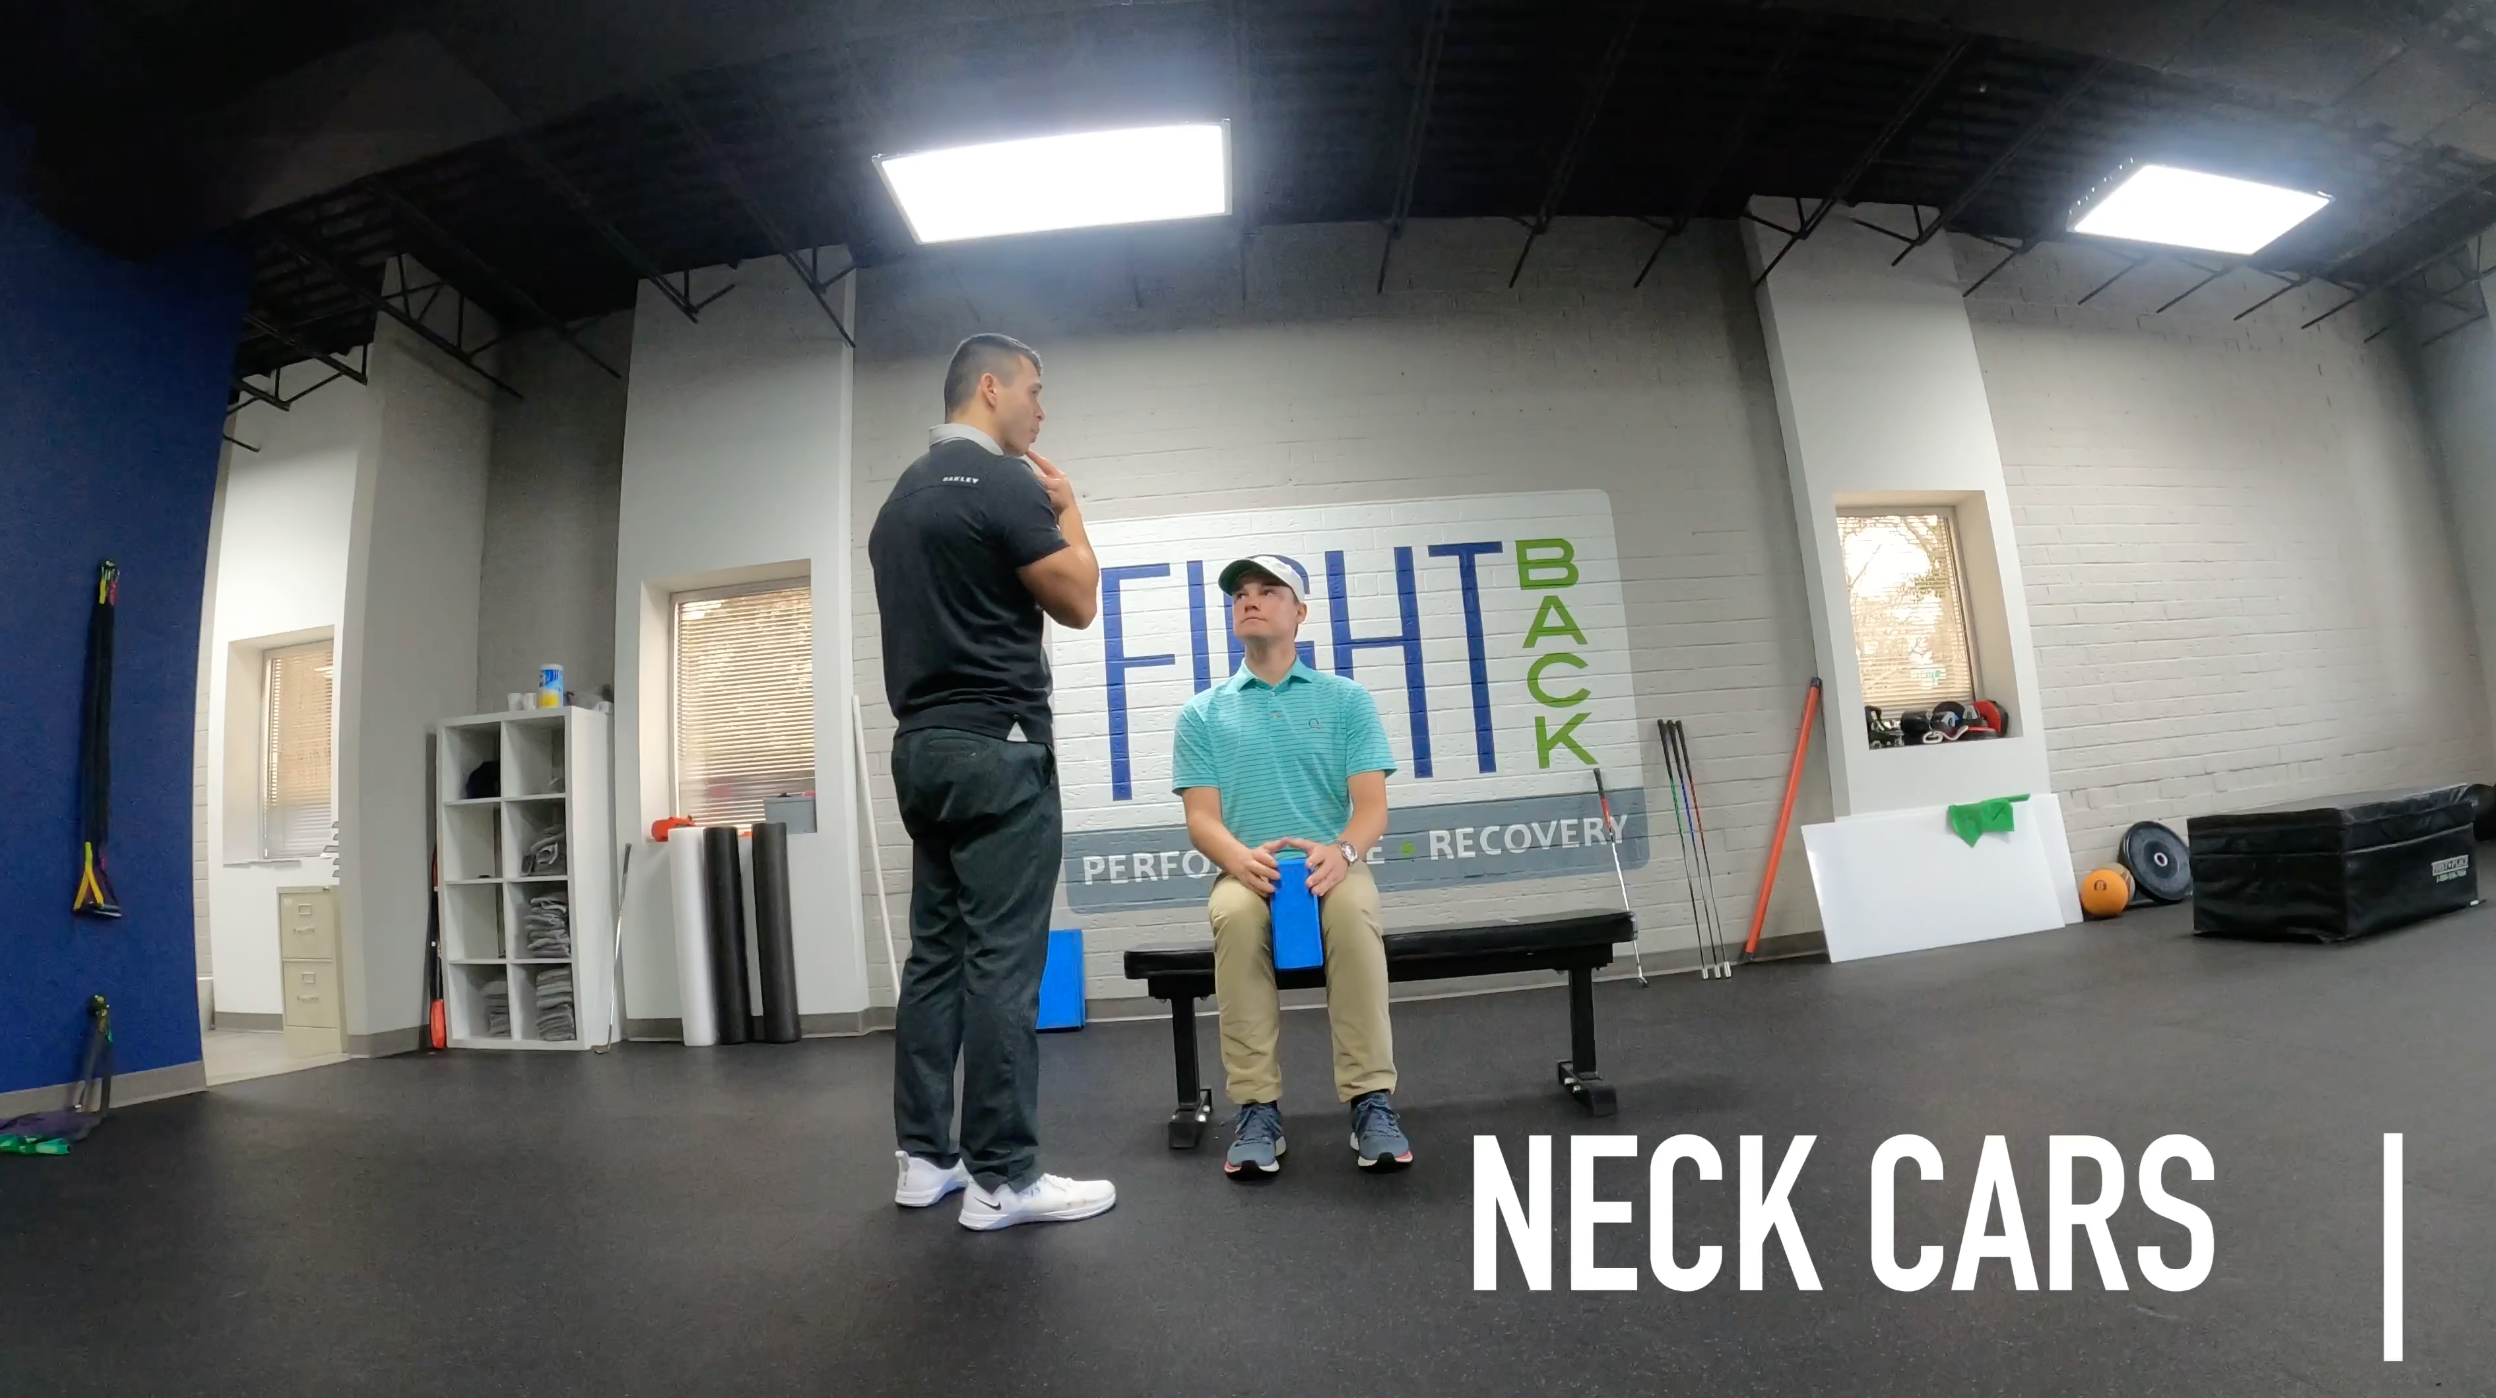 Neck Rotation Exercise for Improved Mobility